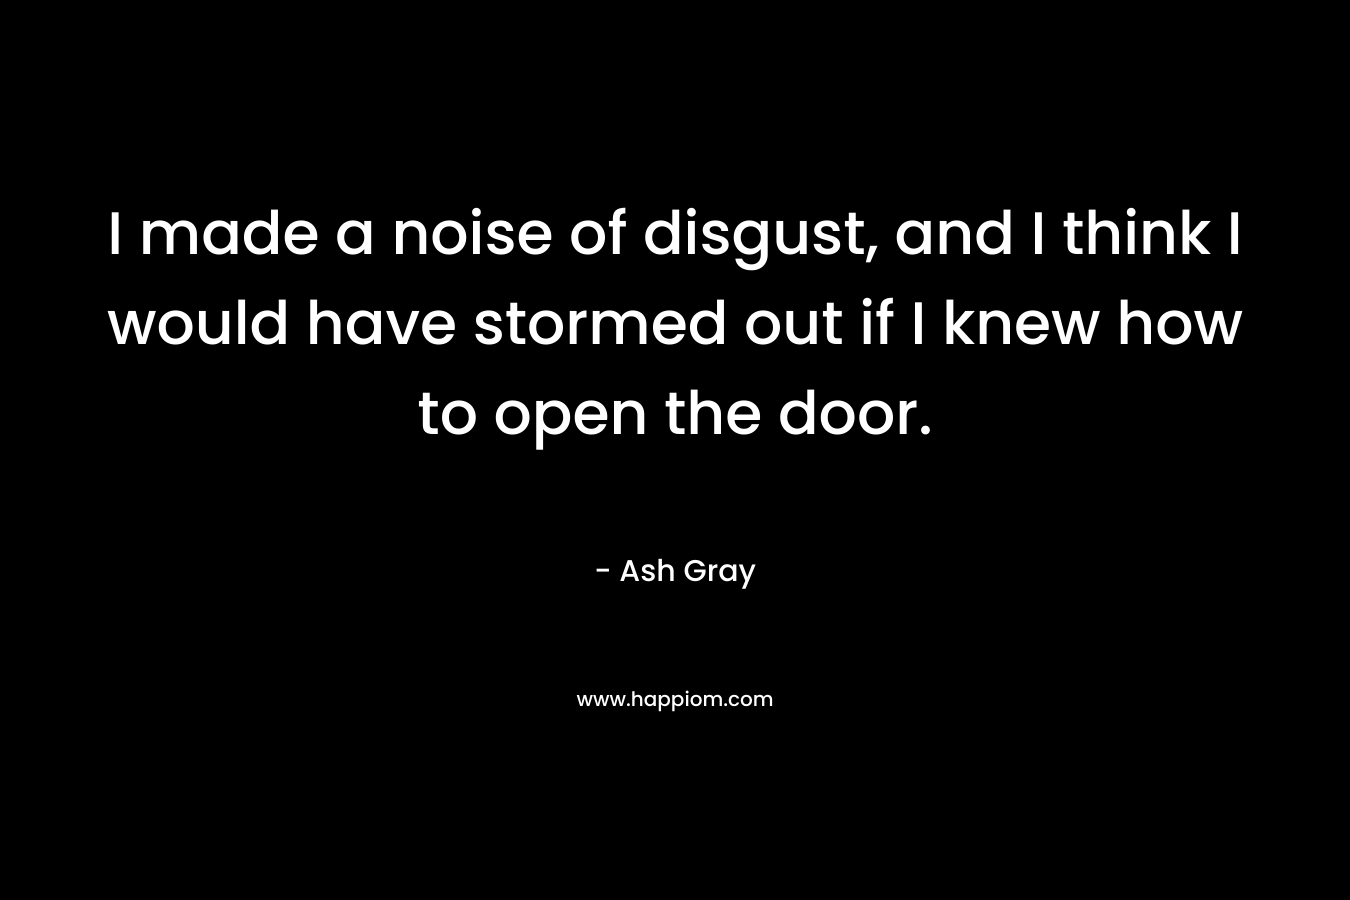 I made a noise of disgust, and I think I would have stormed out if I knew how to open the door.